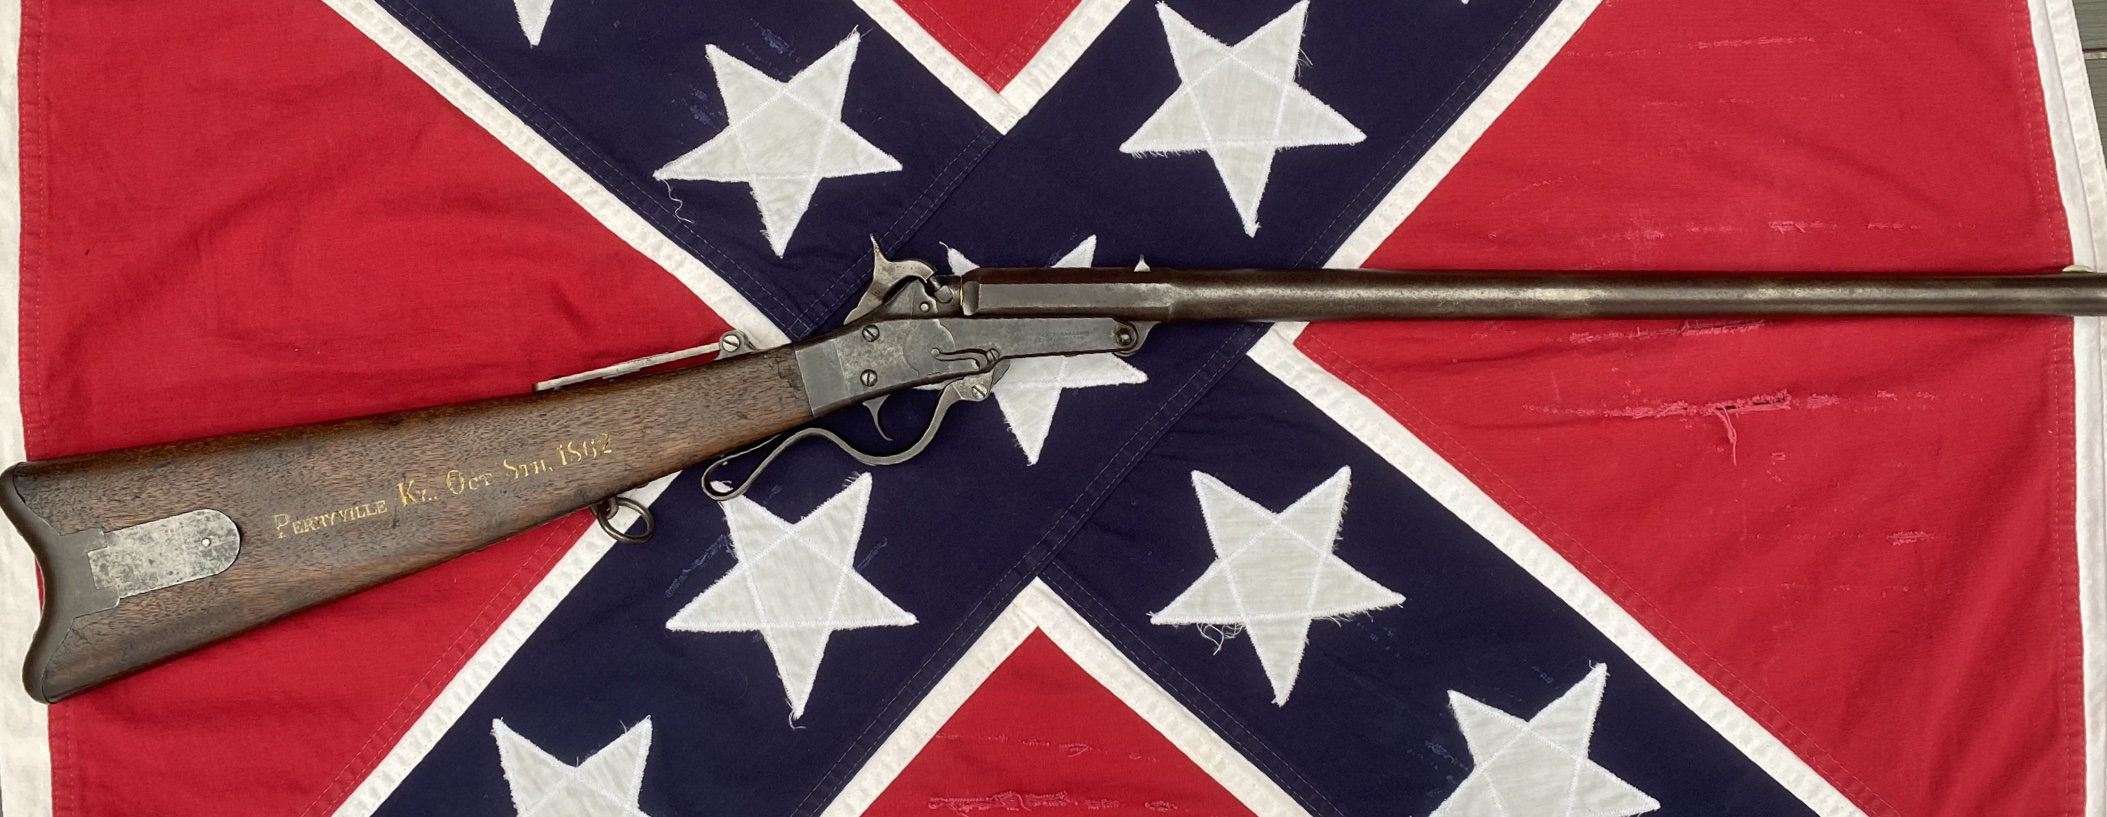 Maynard Carbine 1st Model, Perryville Ky. Oct. 8th 1862